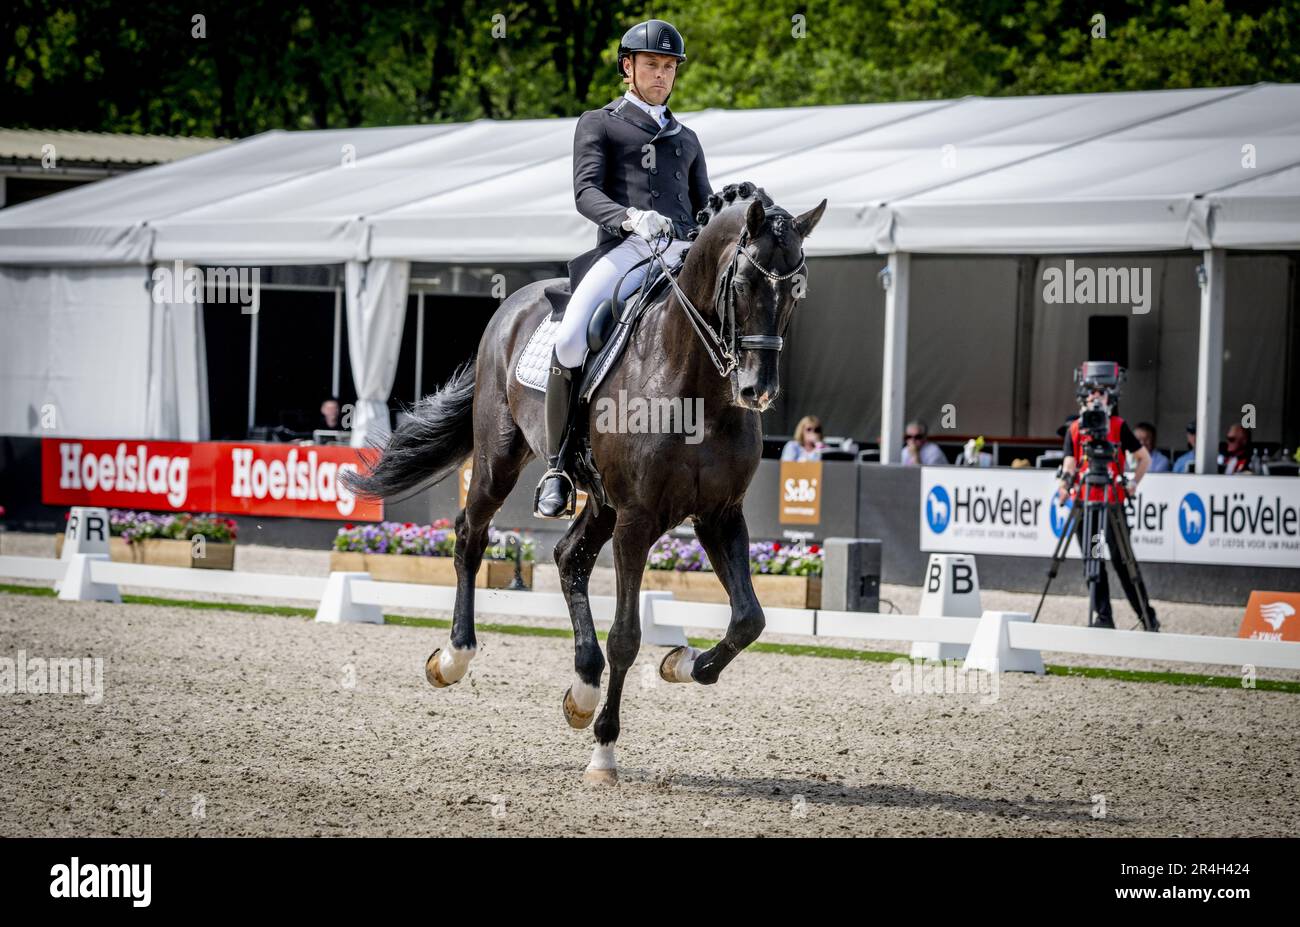 ERMELO - Laurens van Lieren with Dutch Design in action during the final of the Heavy Tour Freestyle at the NK Dressage. ANP ROBIN UTRECHT netherlands out - belgium out Stock Photo